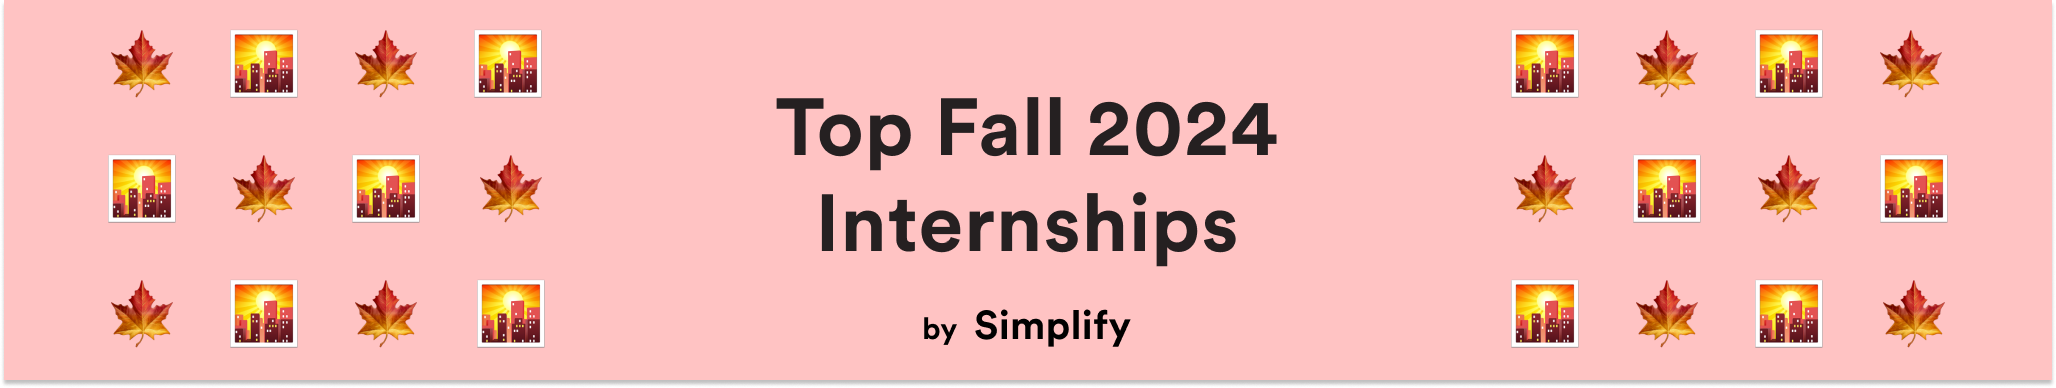 text that says “Remote Friendly Internships by Simplify” surrounded by computer and home emojis